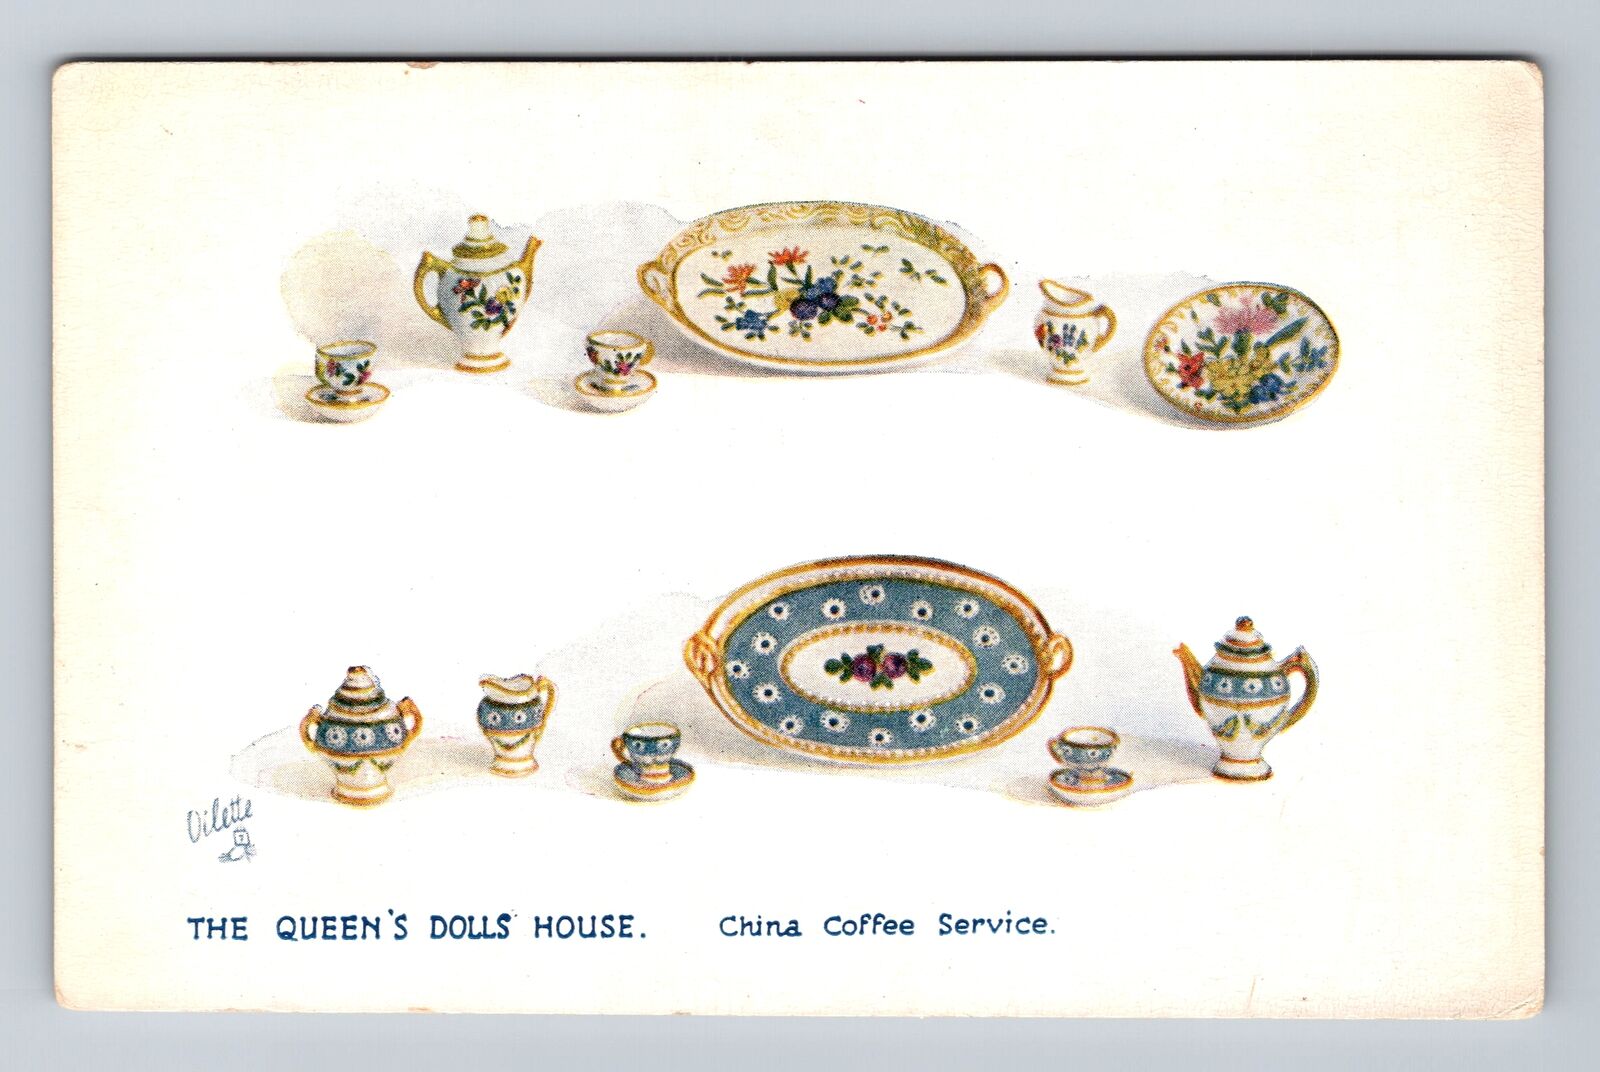 Windsor-England, The Queen's Dolls House, China Coffee Service Vintage Postcard